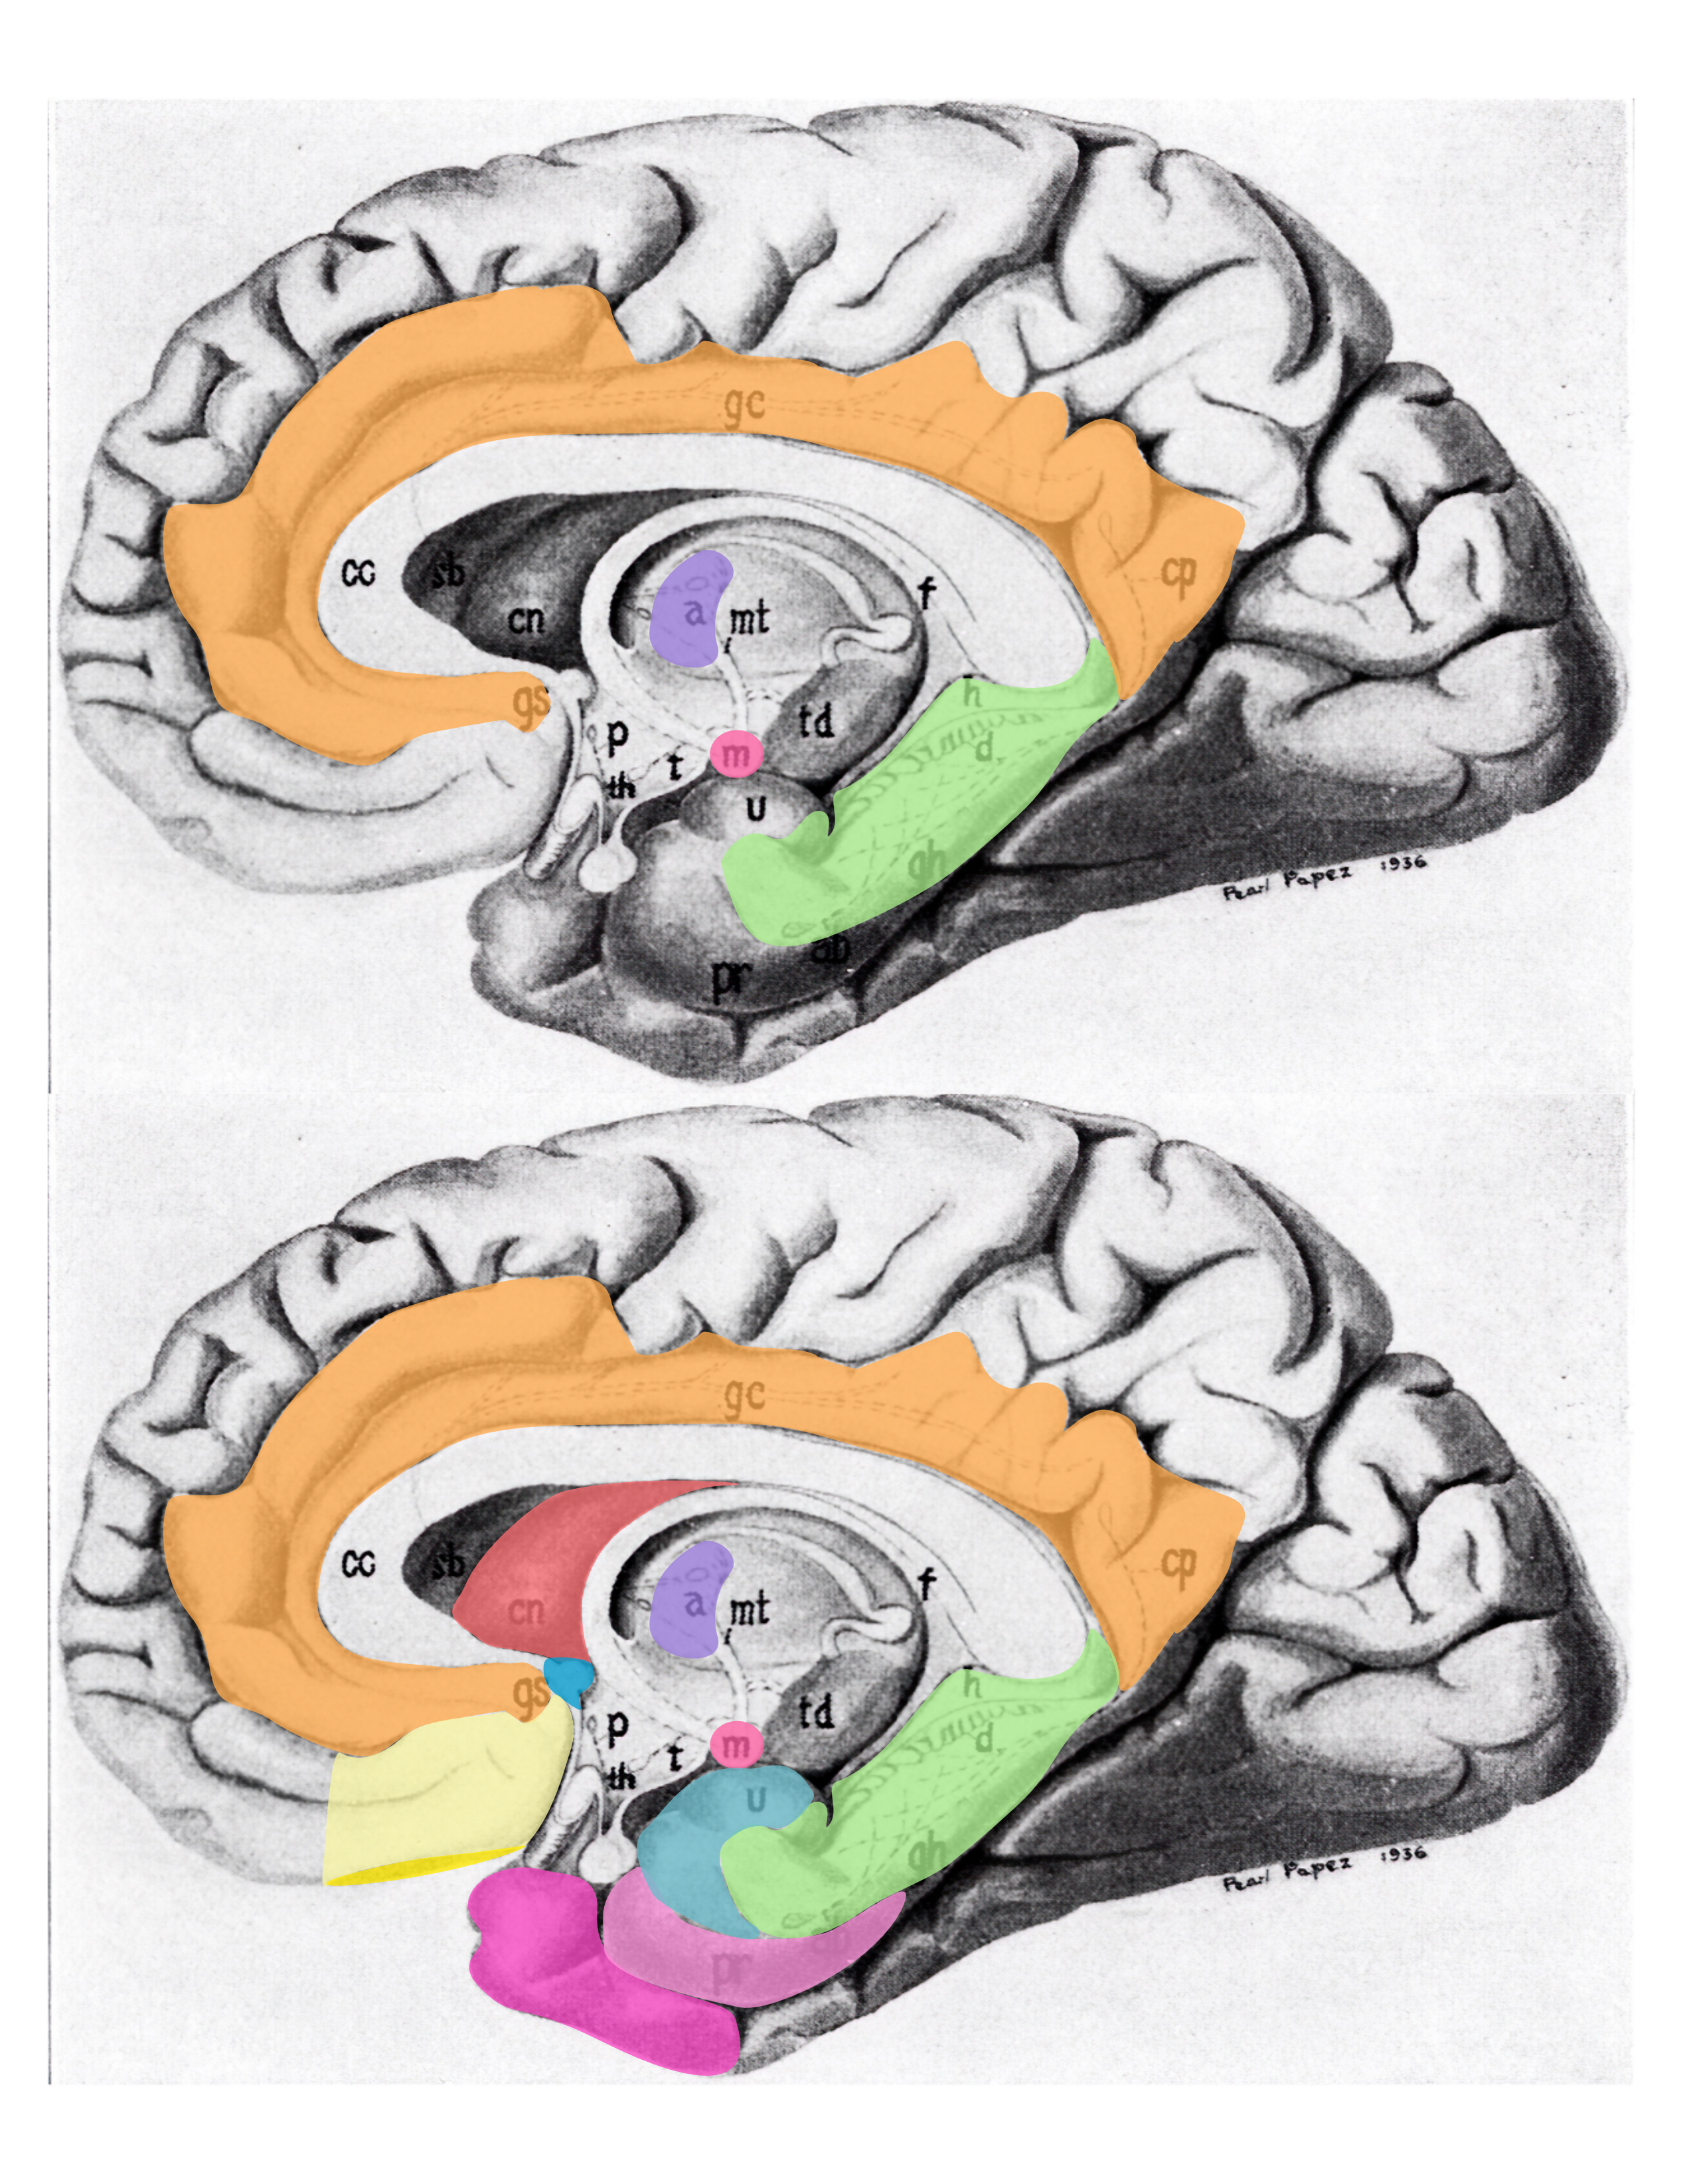 Schematic (modified from Papez’s original drawing) summarizing neural systems proposed to process emotion, highlighting structures that are visible on the medial surface of the brain. Papez’s (1937) original circuit (top) was expanded upon in the concept of the limbic system (bottom) to include a variety of subcortical and cortical territories (MacLean, 1952; Heimer and Van Hoesen, 2006). (Structures like the anterior insula and nucleus basalis of Meynert, which are not visible on the medial surface of the brain, are not represented here). Orange: cingulate cortex; purple: anterior thalamus; red mammilary bodies; green hippocampus; light yellow: ventromedial frontal cortex; yellow: caudal orbital frontal cortex; hot pink: temporal polar cortex; pink: pyriform and entorhinal cortex; salmon: striatum; blue: septal nuclei; turquoise: amygdala. Modified from Barger N, Hanson KL, Teffer K, Schenker-Ahmed NM and Semendeferi K (2014) Evidence for evolutionary specialization in human limbic structures. Front. Hum. Neurosci. 8:277. doi: 10.3389/fnhum.2014.00277